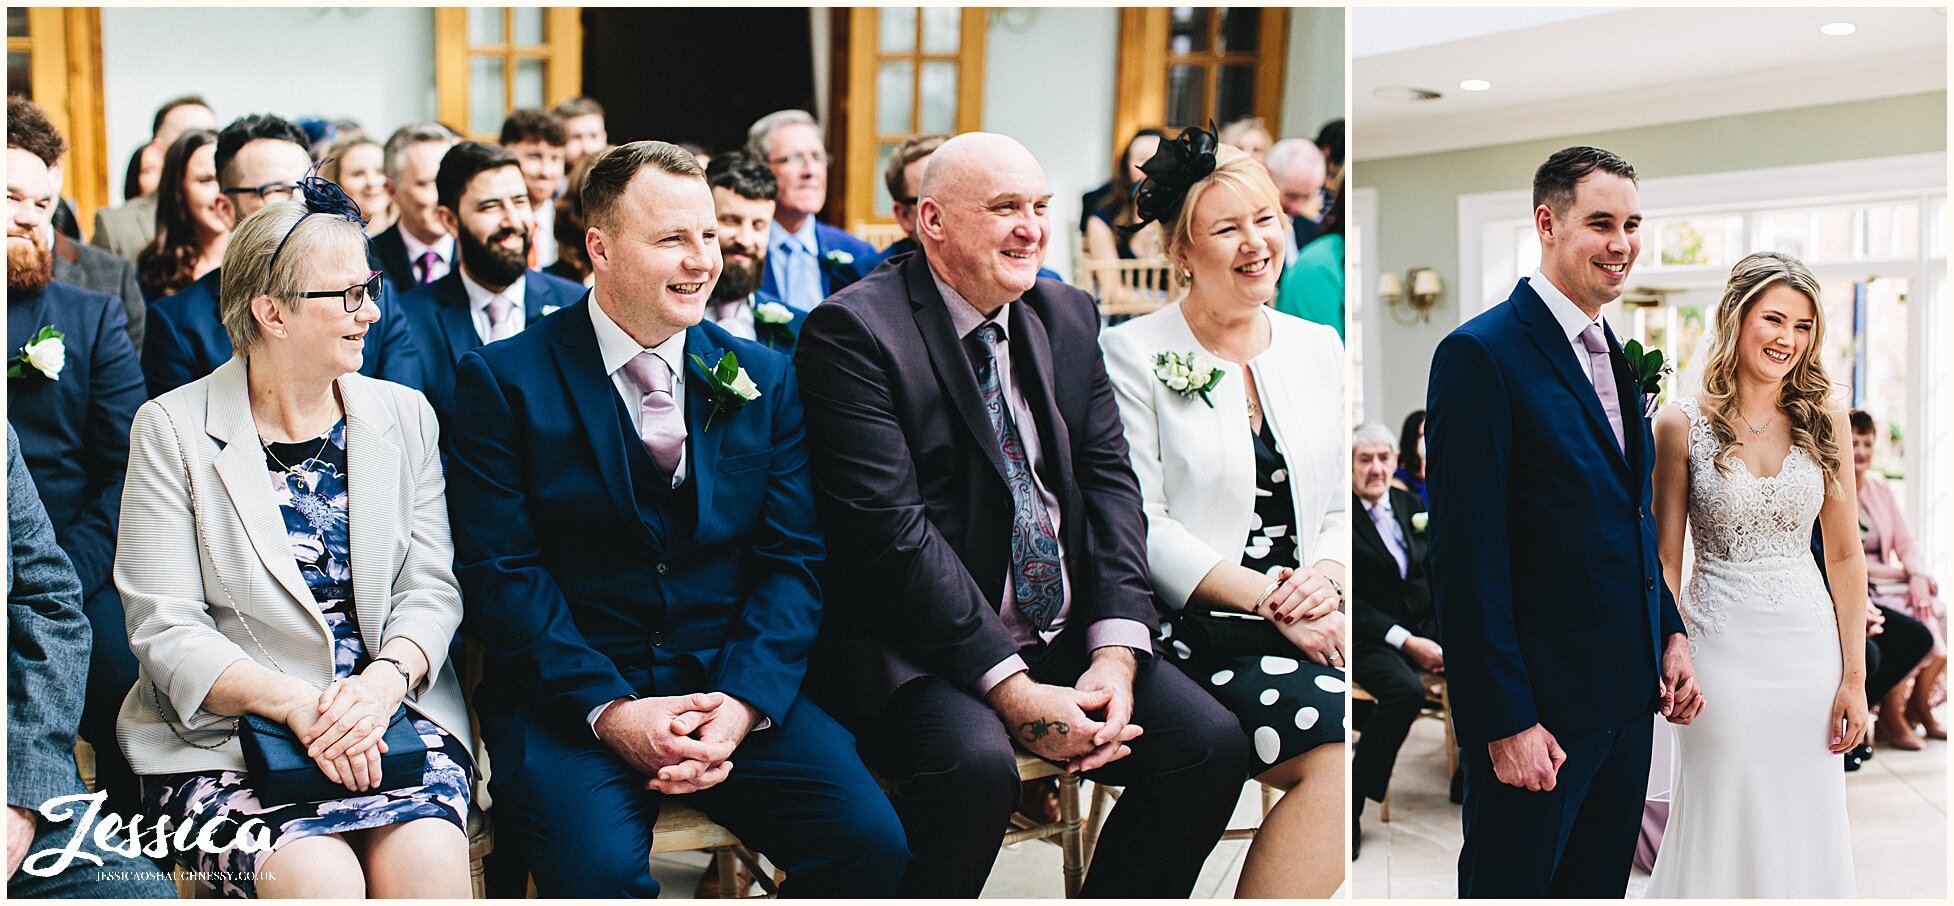 guests smile at the couple during the service